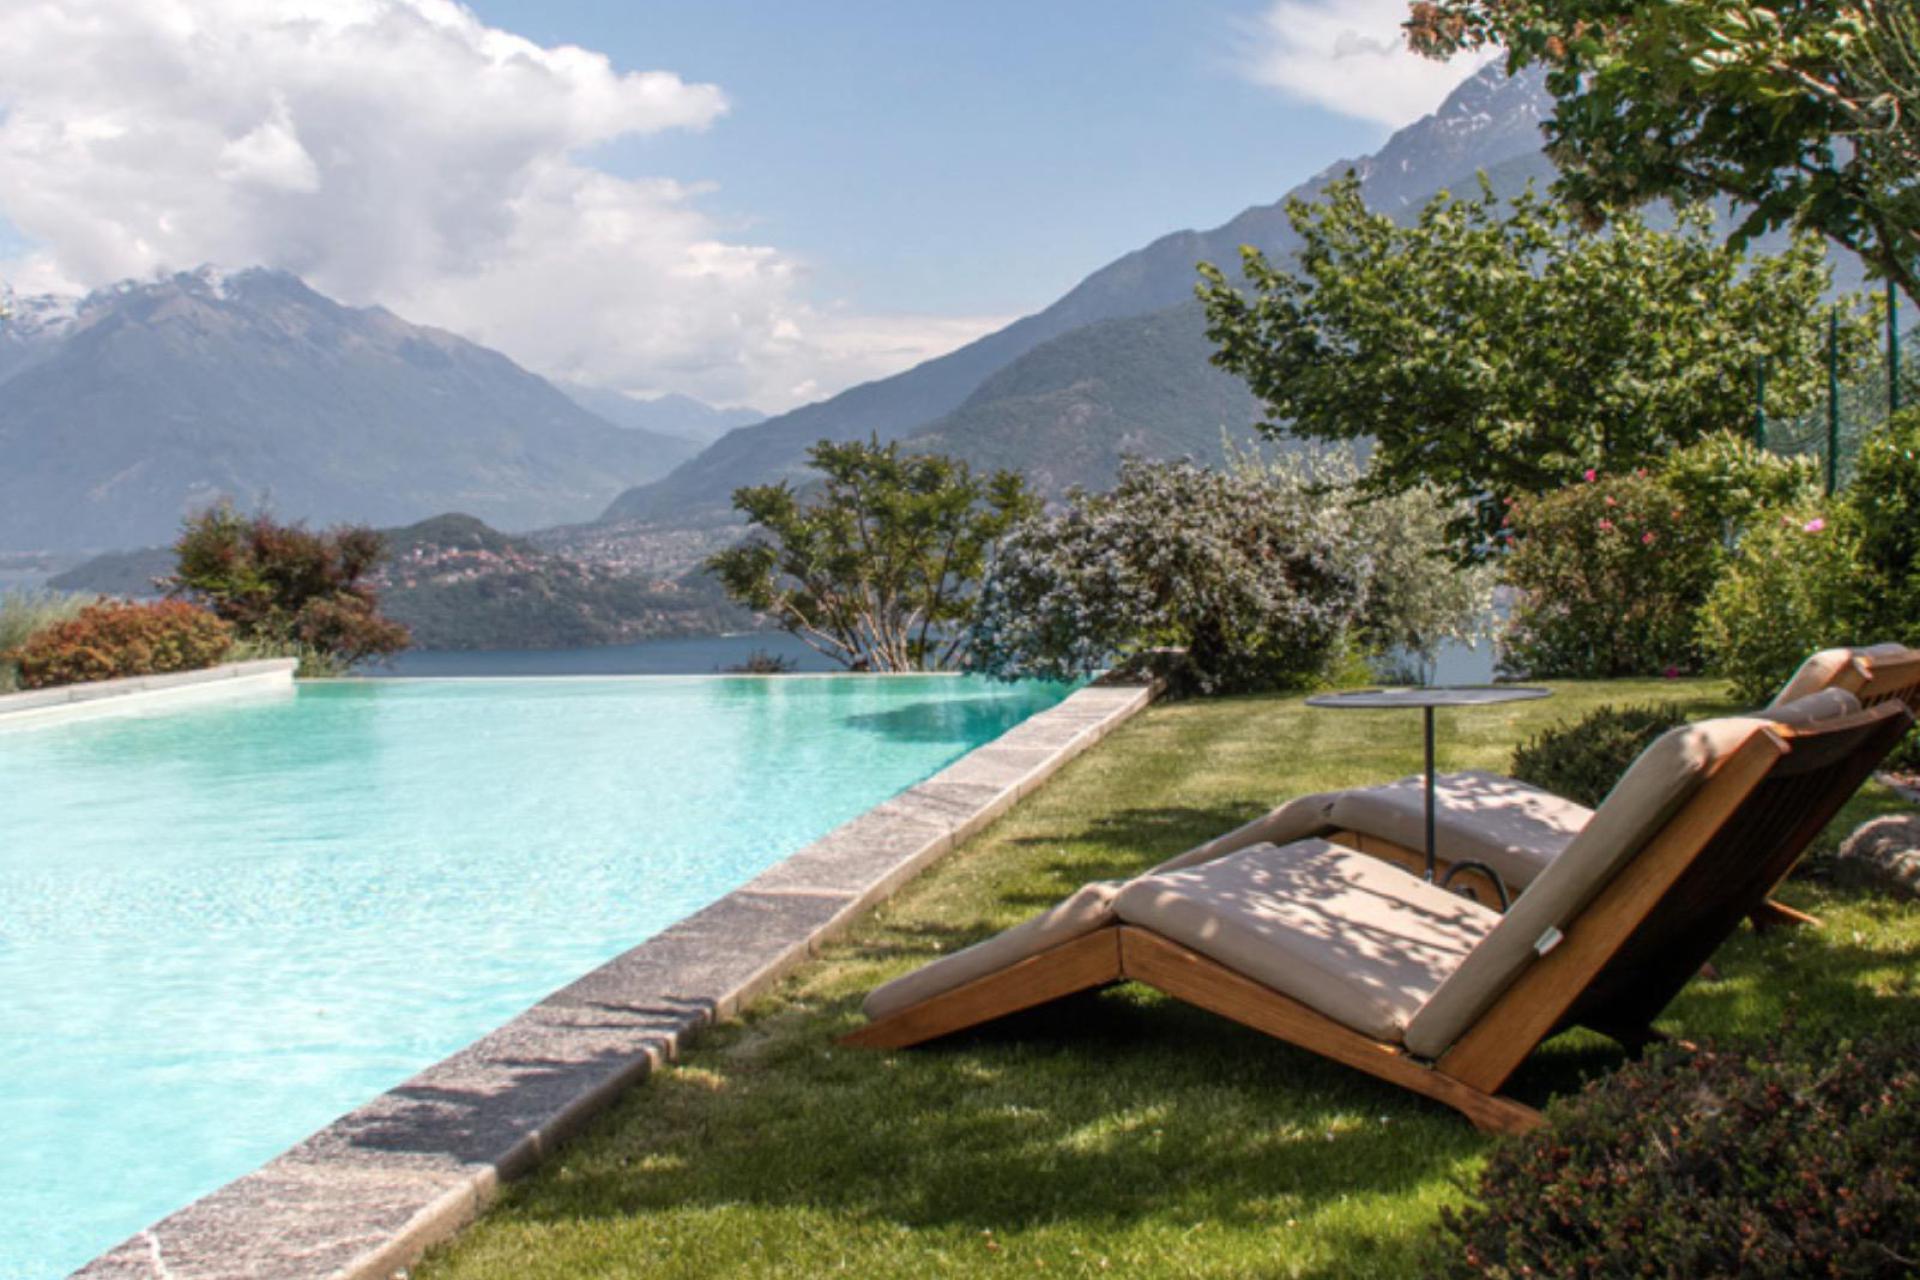 2. Luxury agriturismo with beautiful lake view